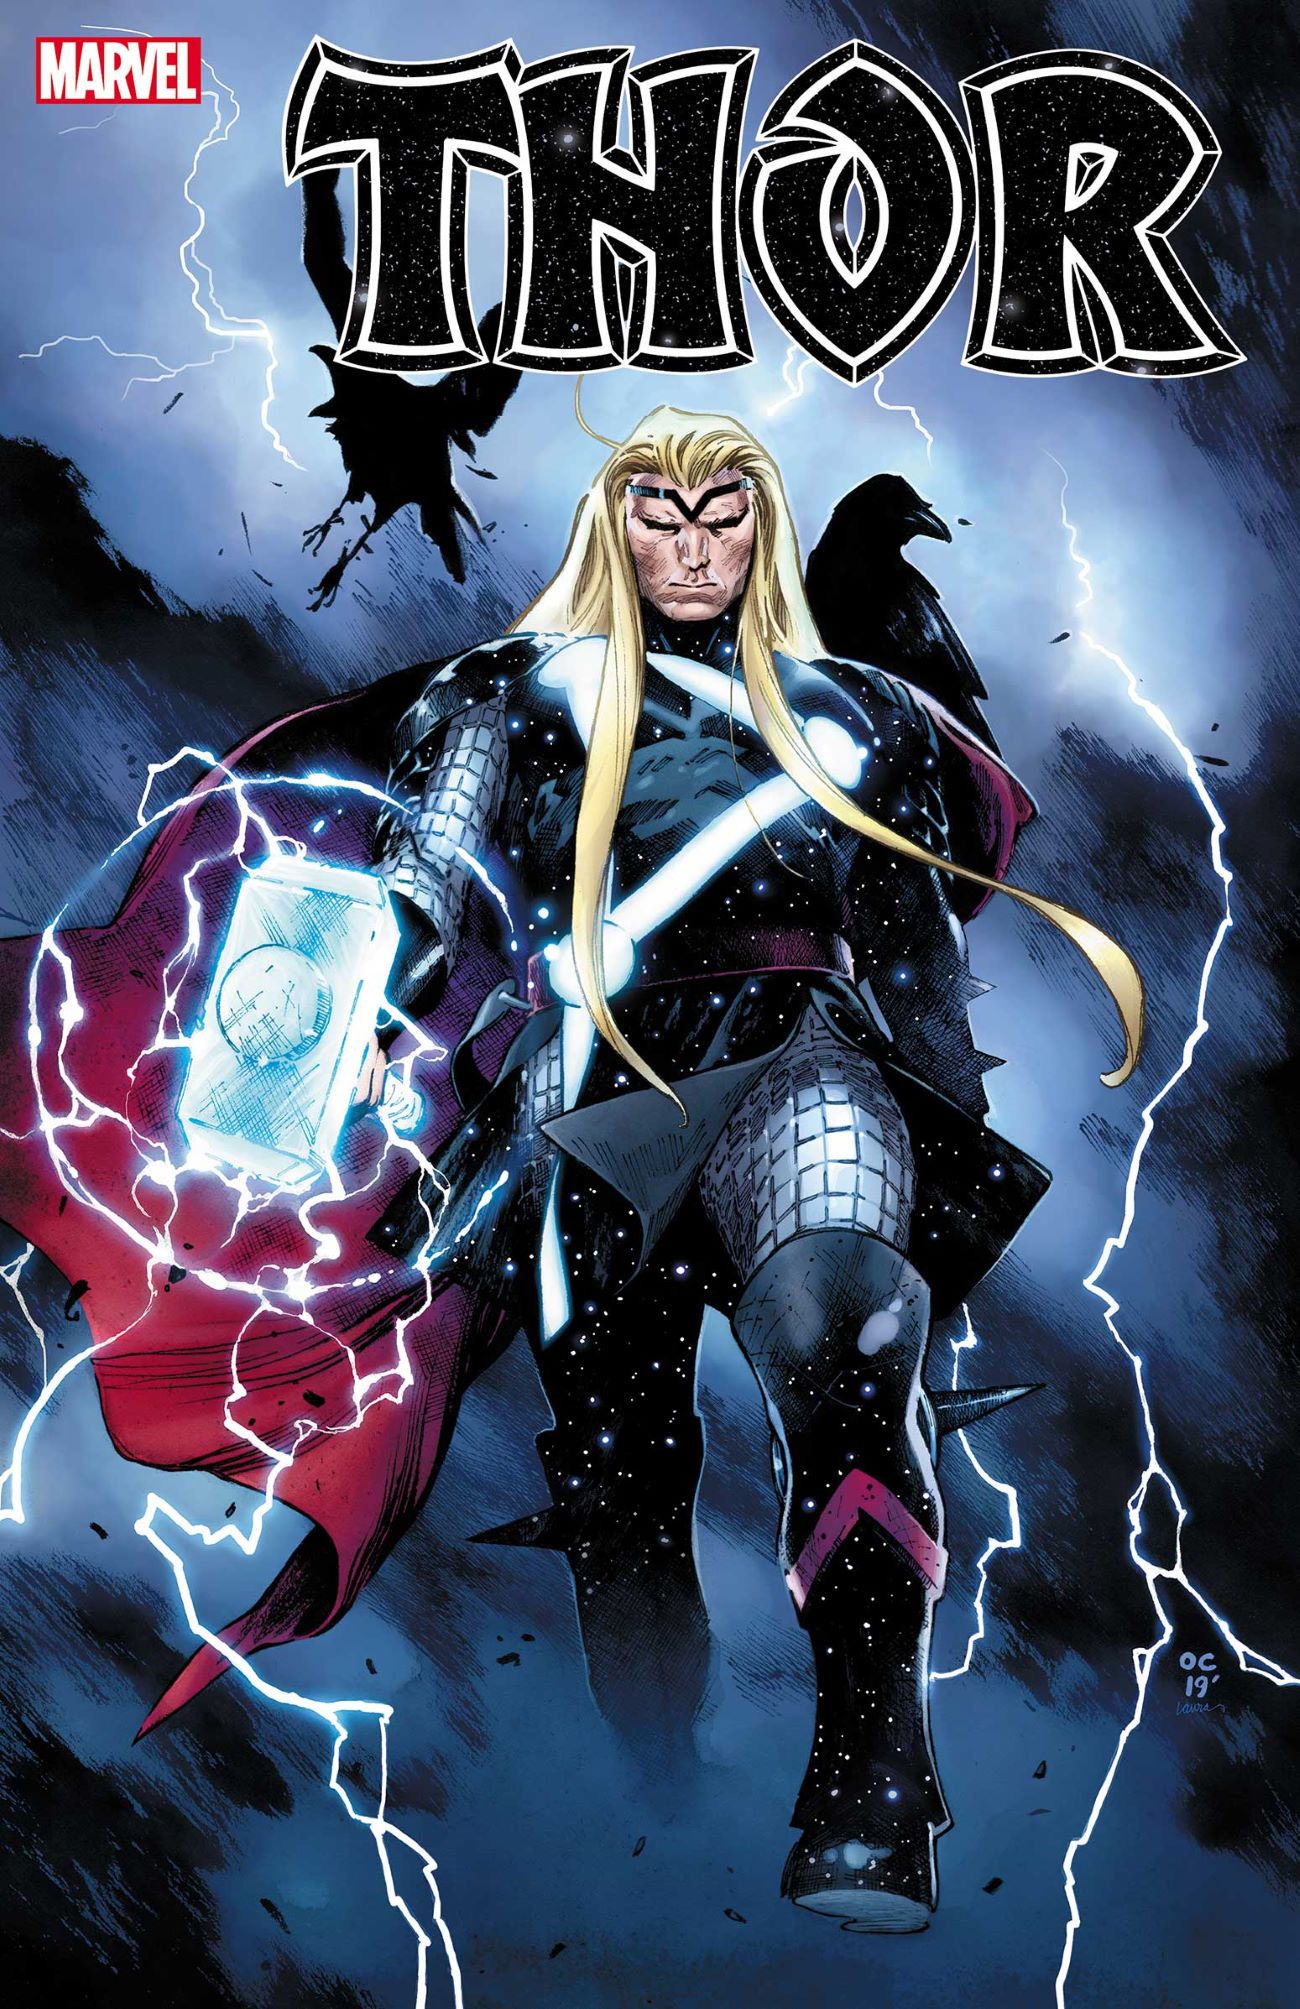 New Thor Comic Series Cover